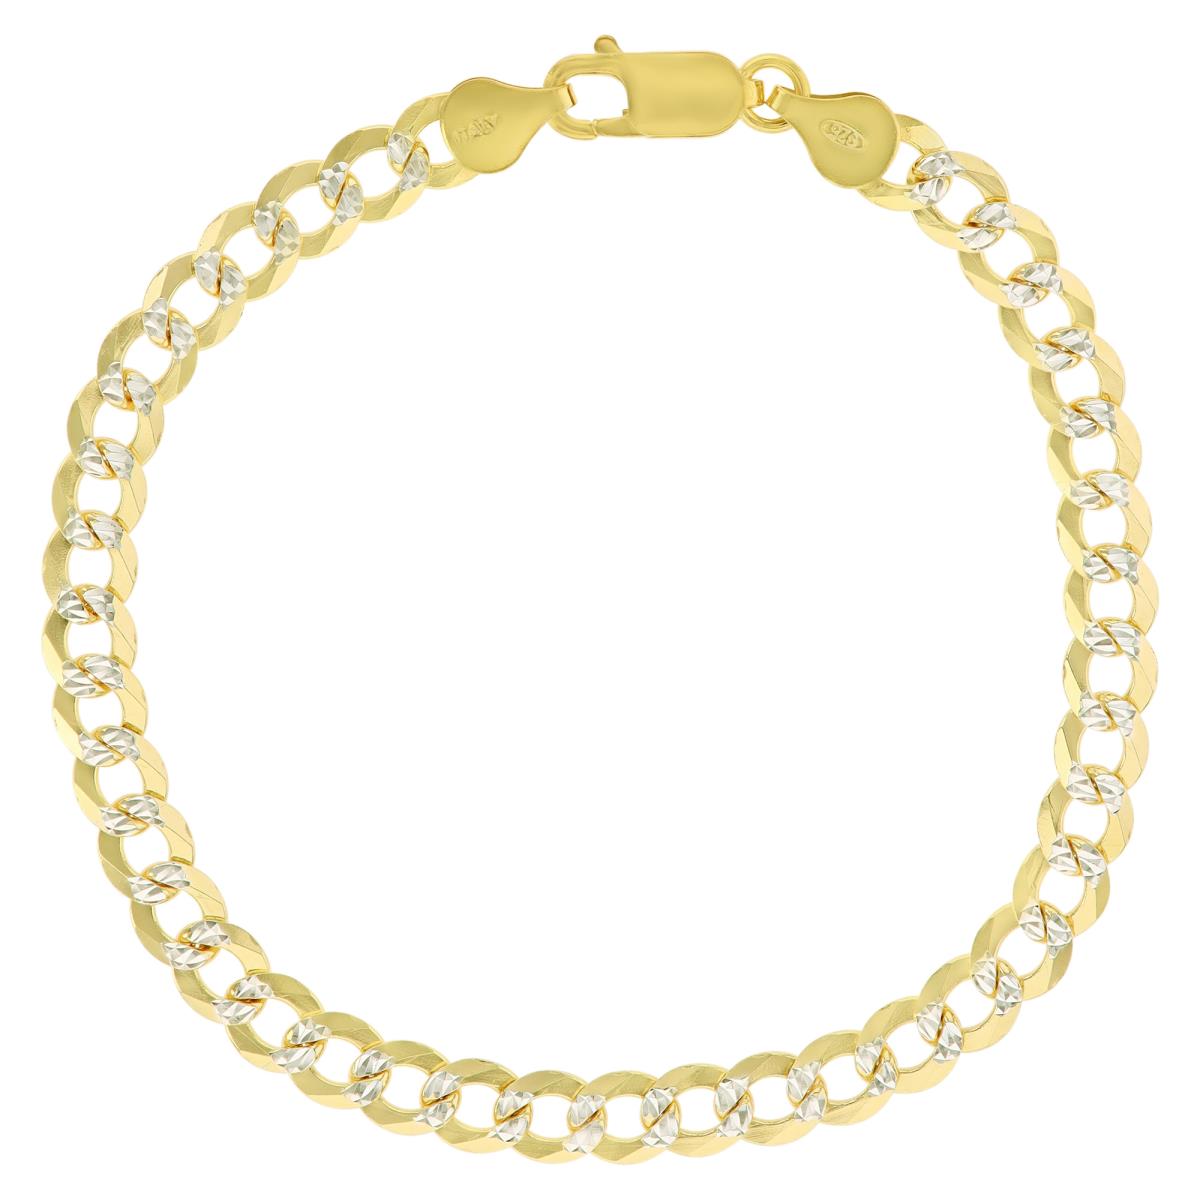 Sterling Silver Two-Tone DC 5.8mm 160 Curb Pave 8.25"Chain Bracelet